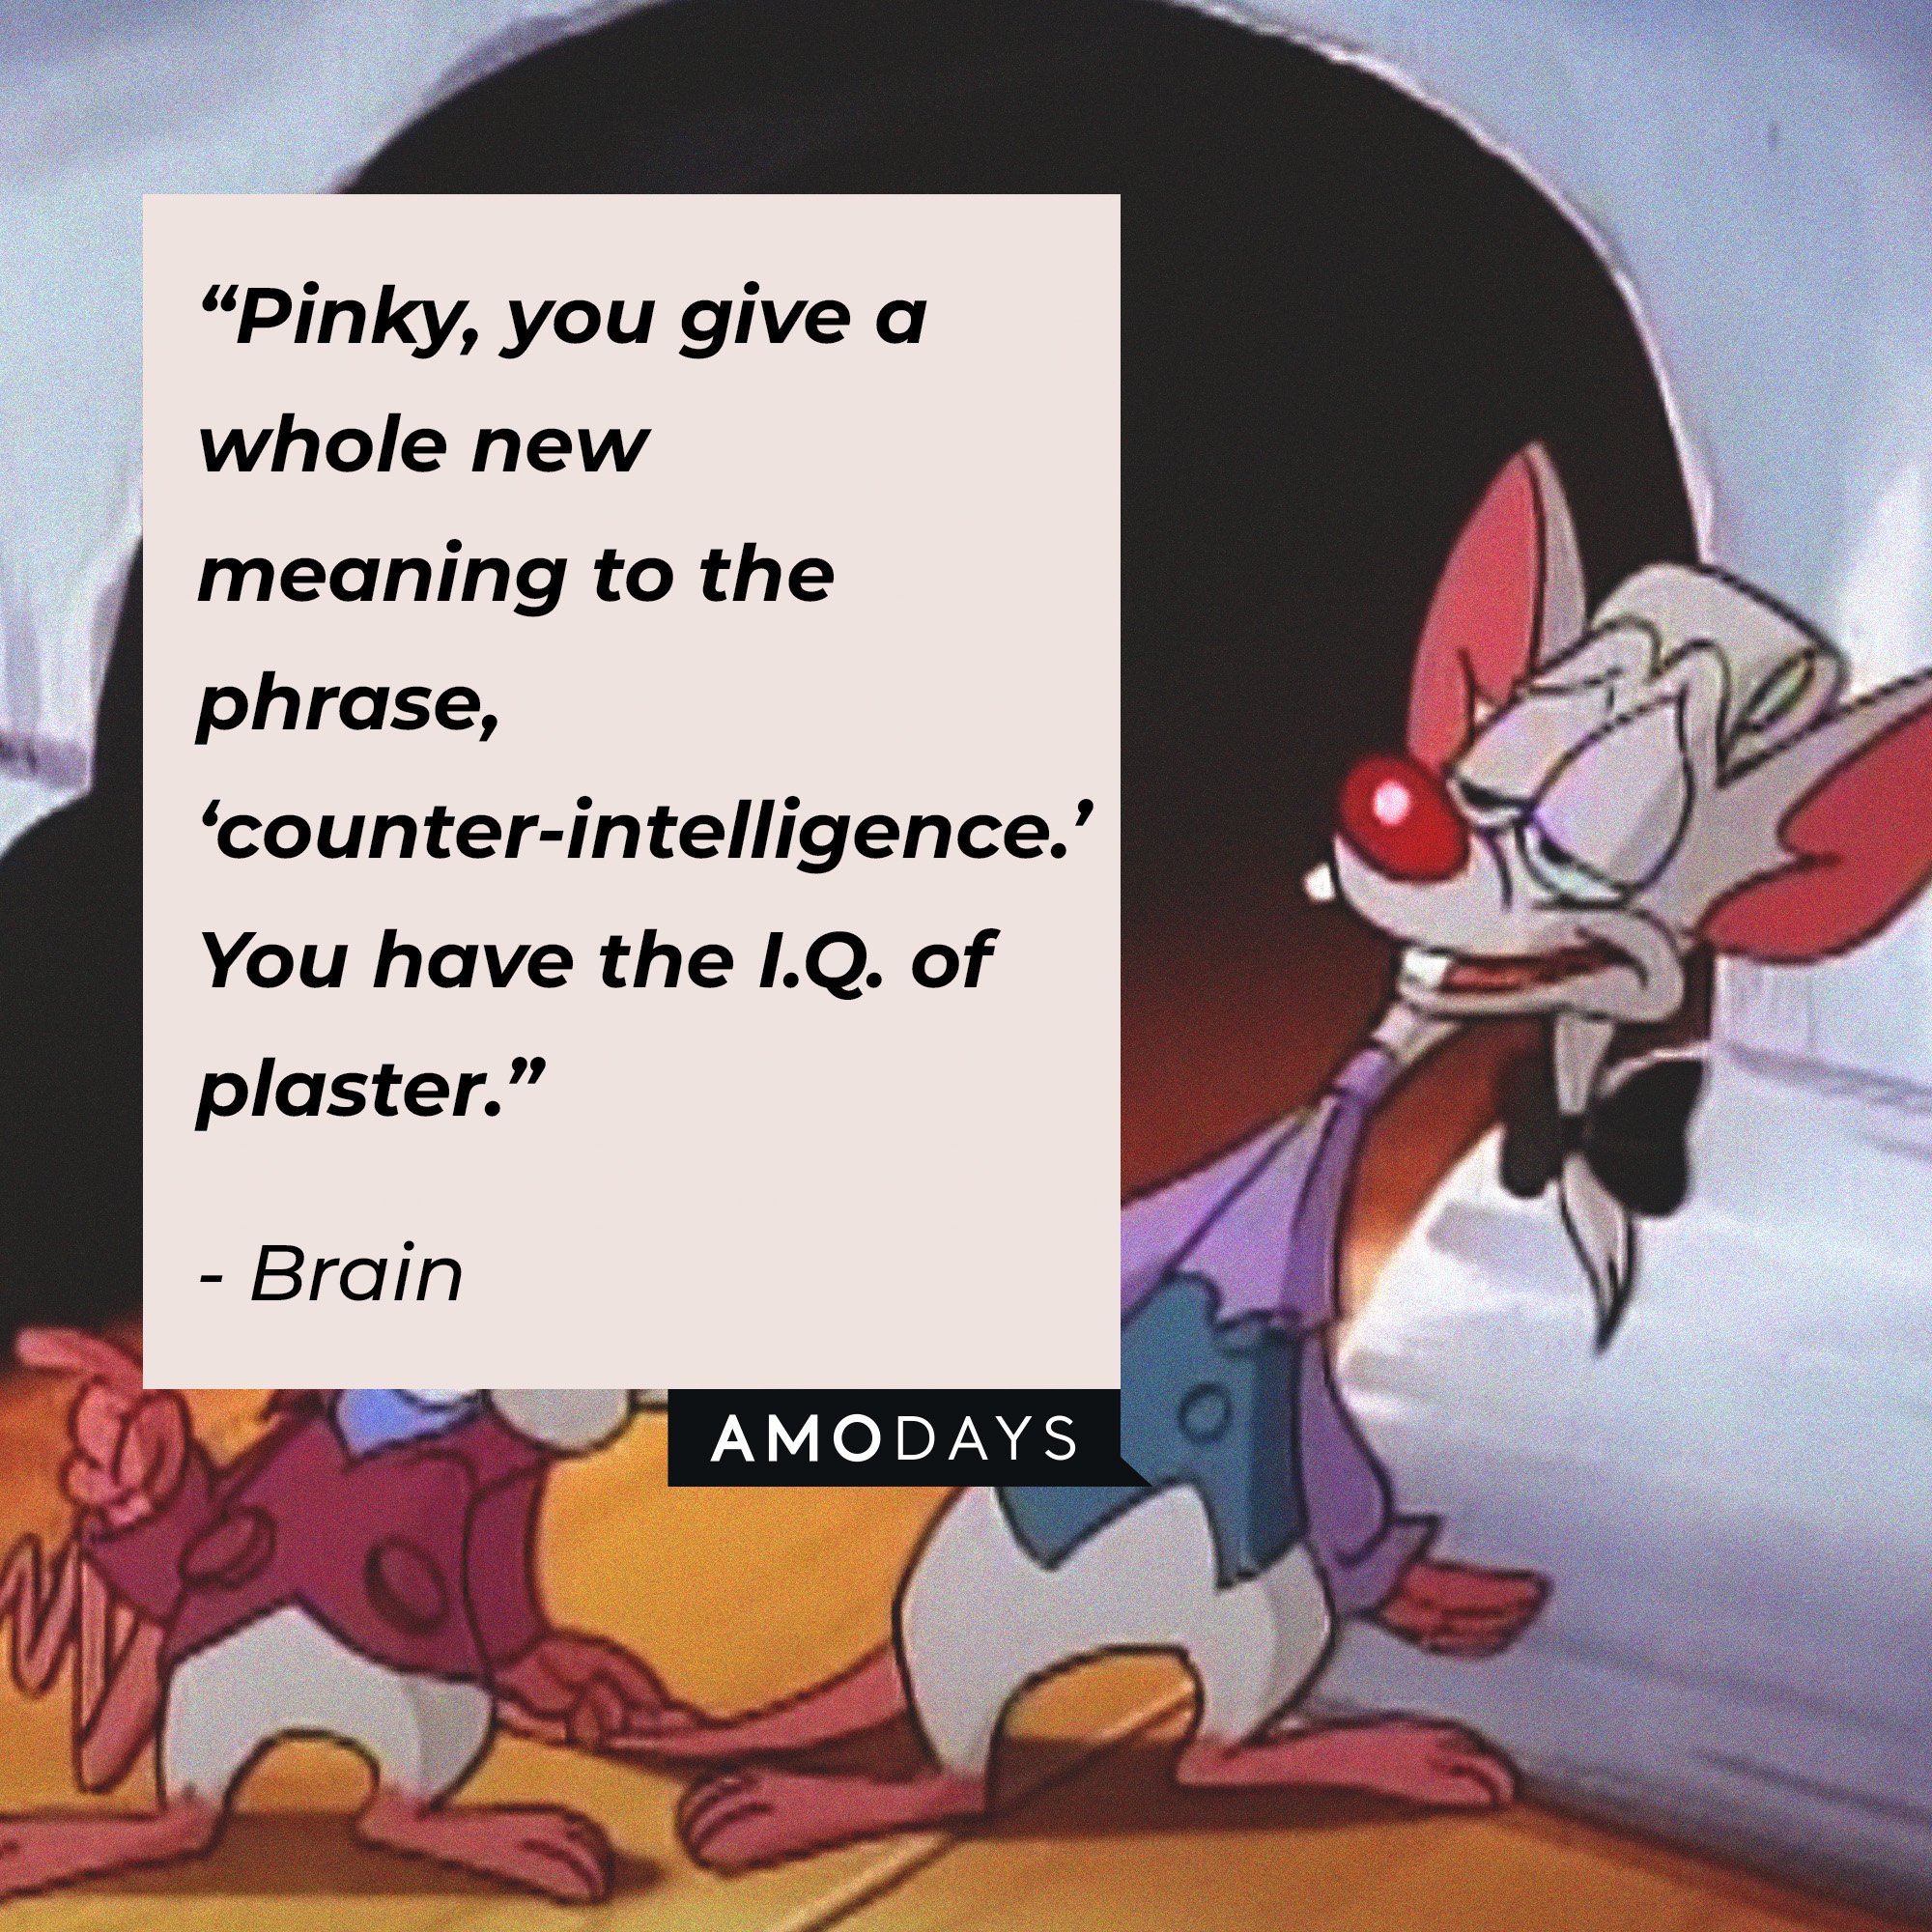 Brain's quote: “Pinky, you give a whole new meaning to the phrase, ‘counter-intelligence.’ You have the I.Q. of plaster.” | Image: AmoDays